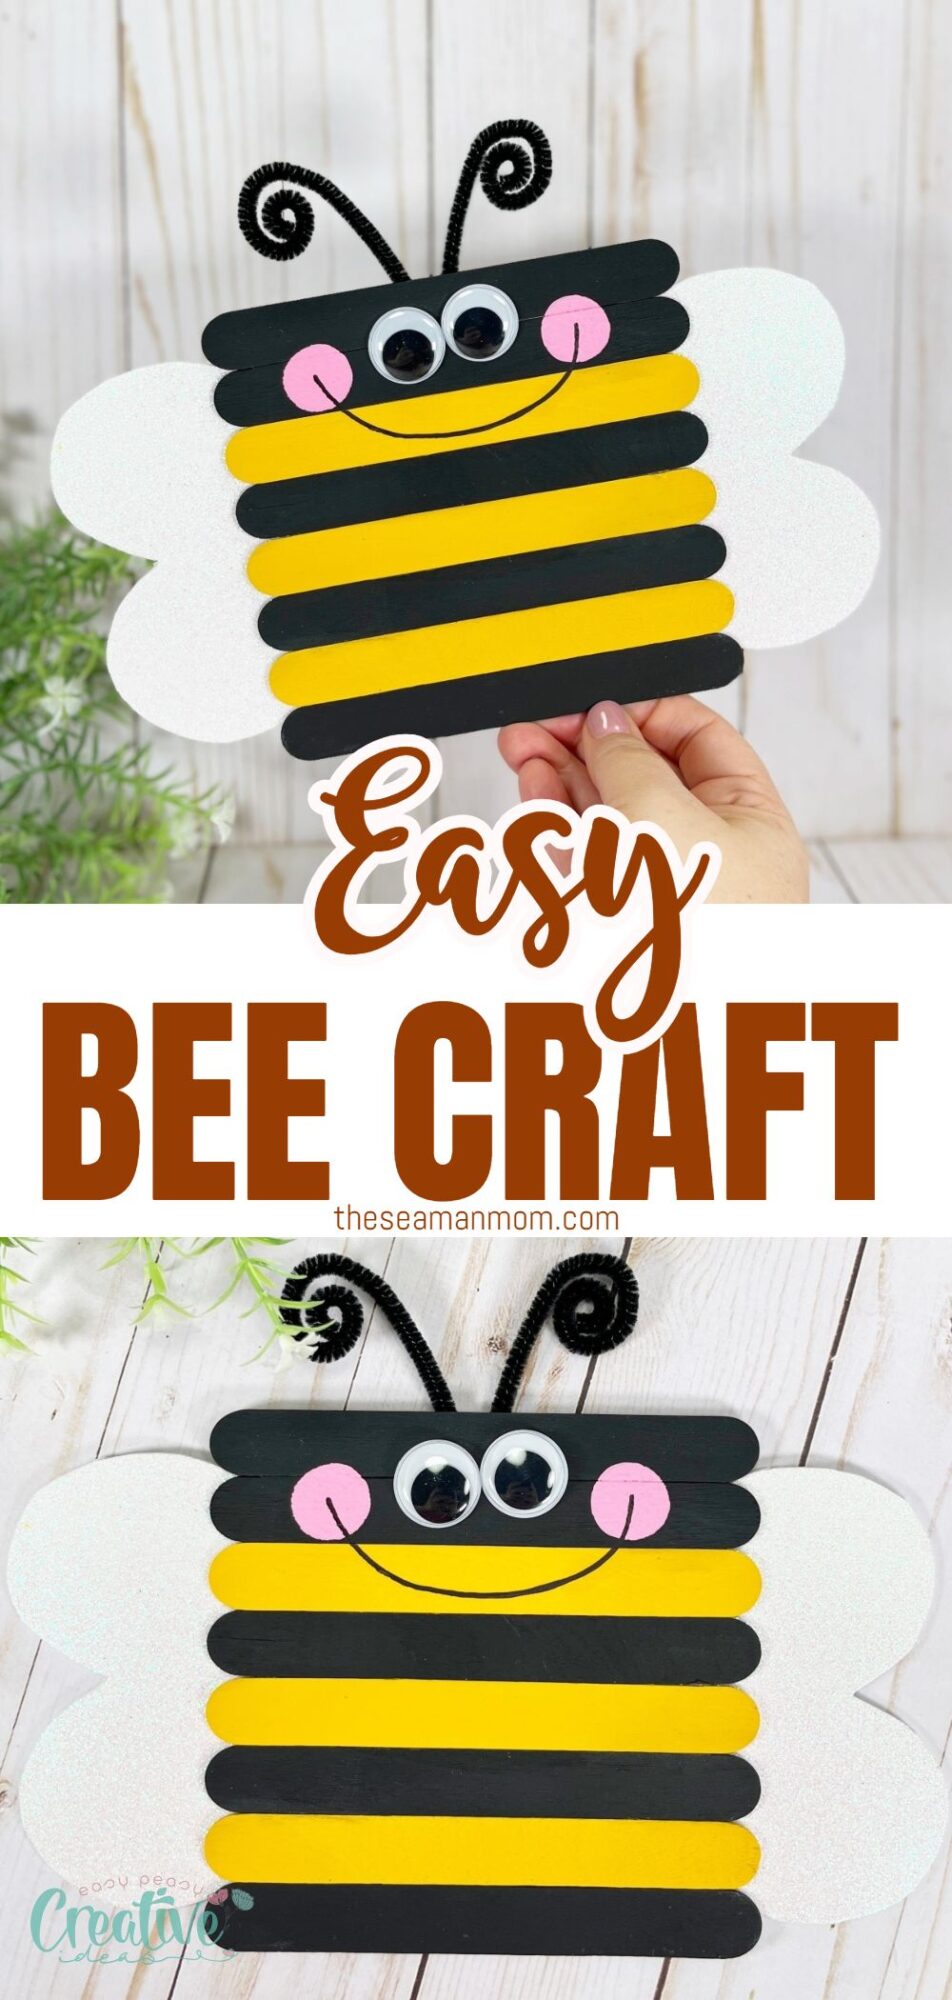 Get crafty with an easy bee craft for kids! Follow the step-by-step tutorial to create adorable bee decorations using simple materials. Unleash your creativity and have a buzzing good time!